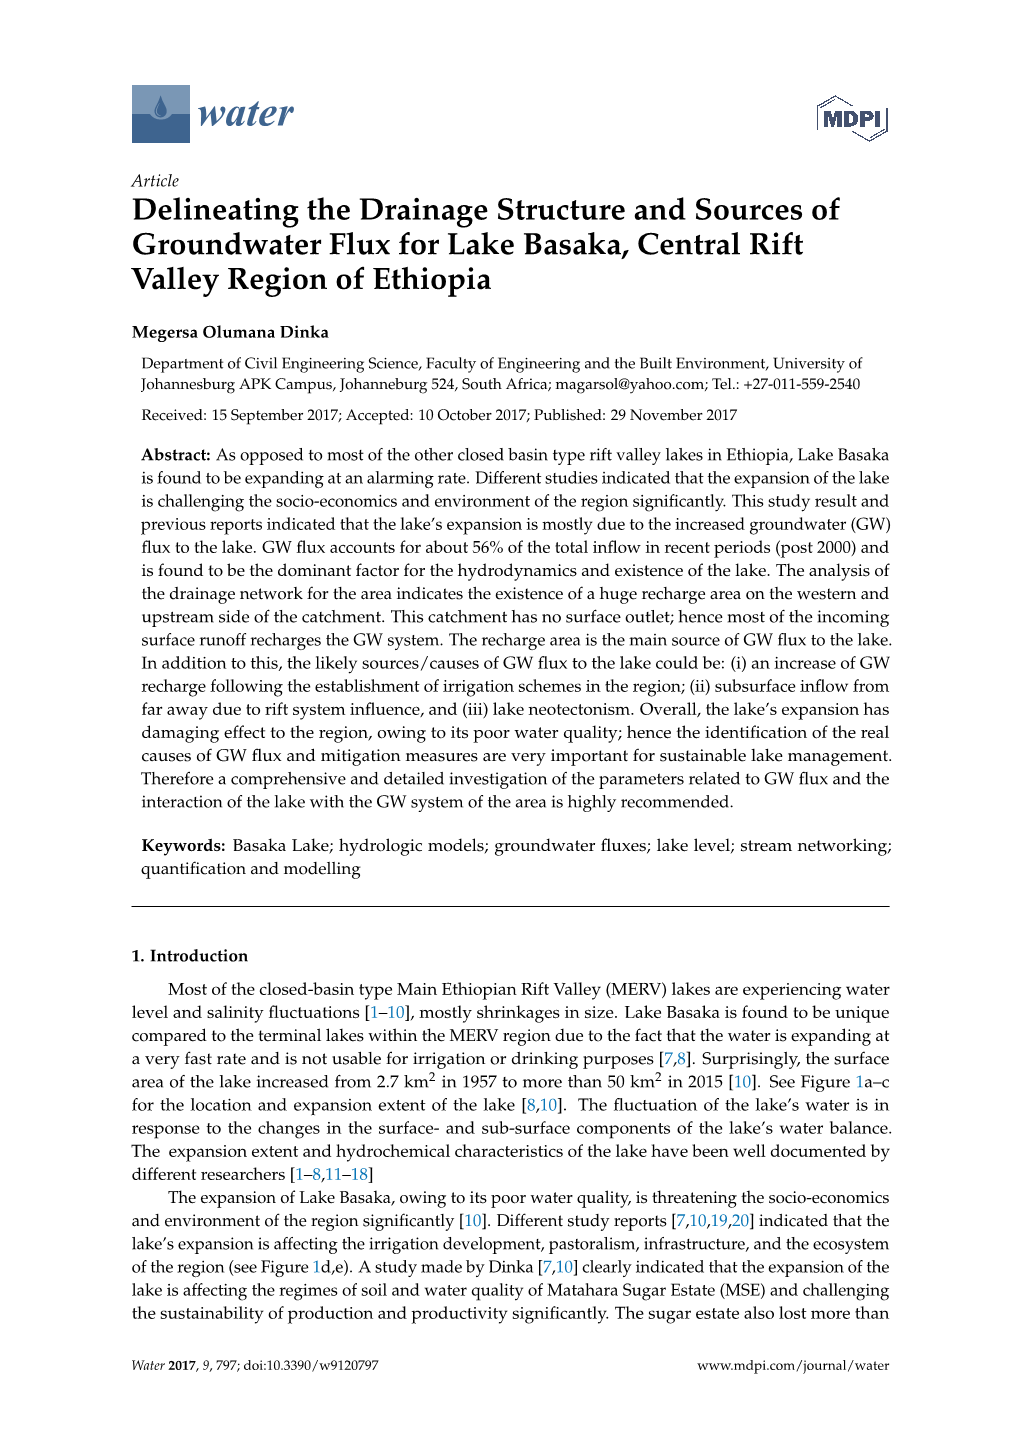 Delineating the Drainage Structure and Sources of Groundwater Flux for Lake Basaka, Central Rift Valley Region of Ethiopia